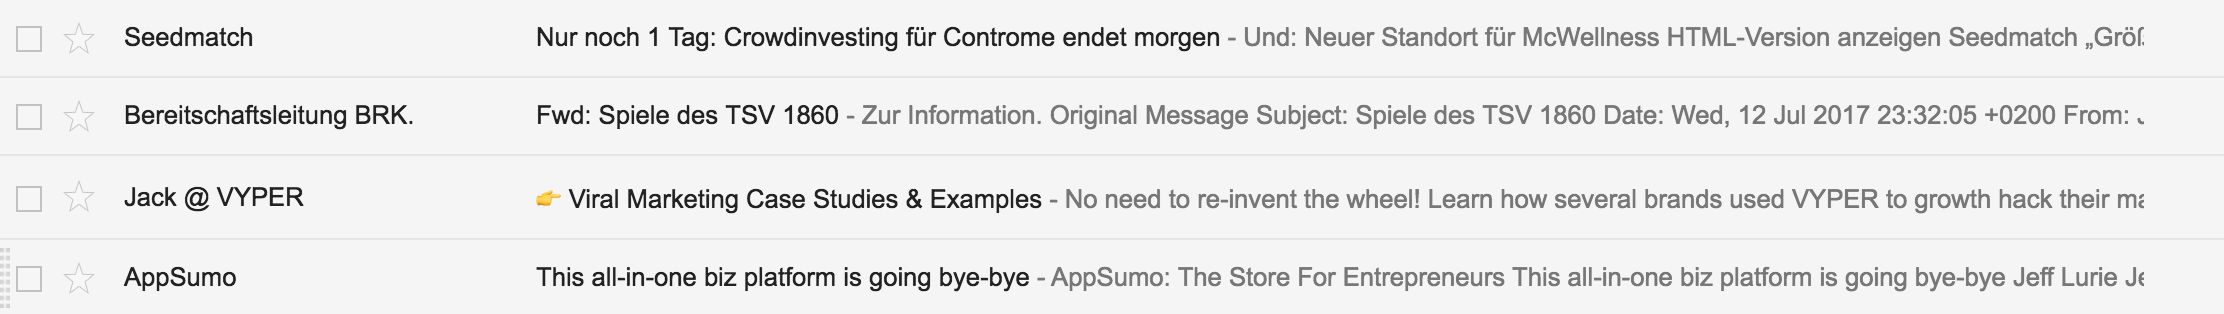 Emojis stand out in the email inbox